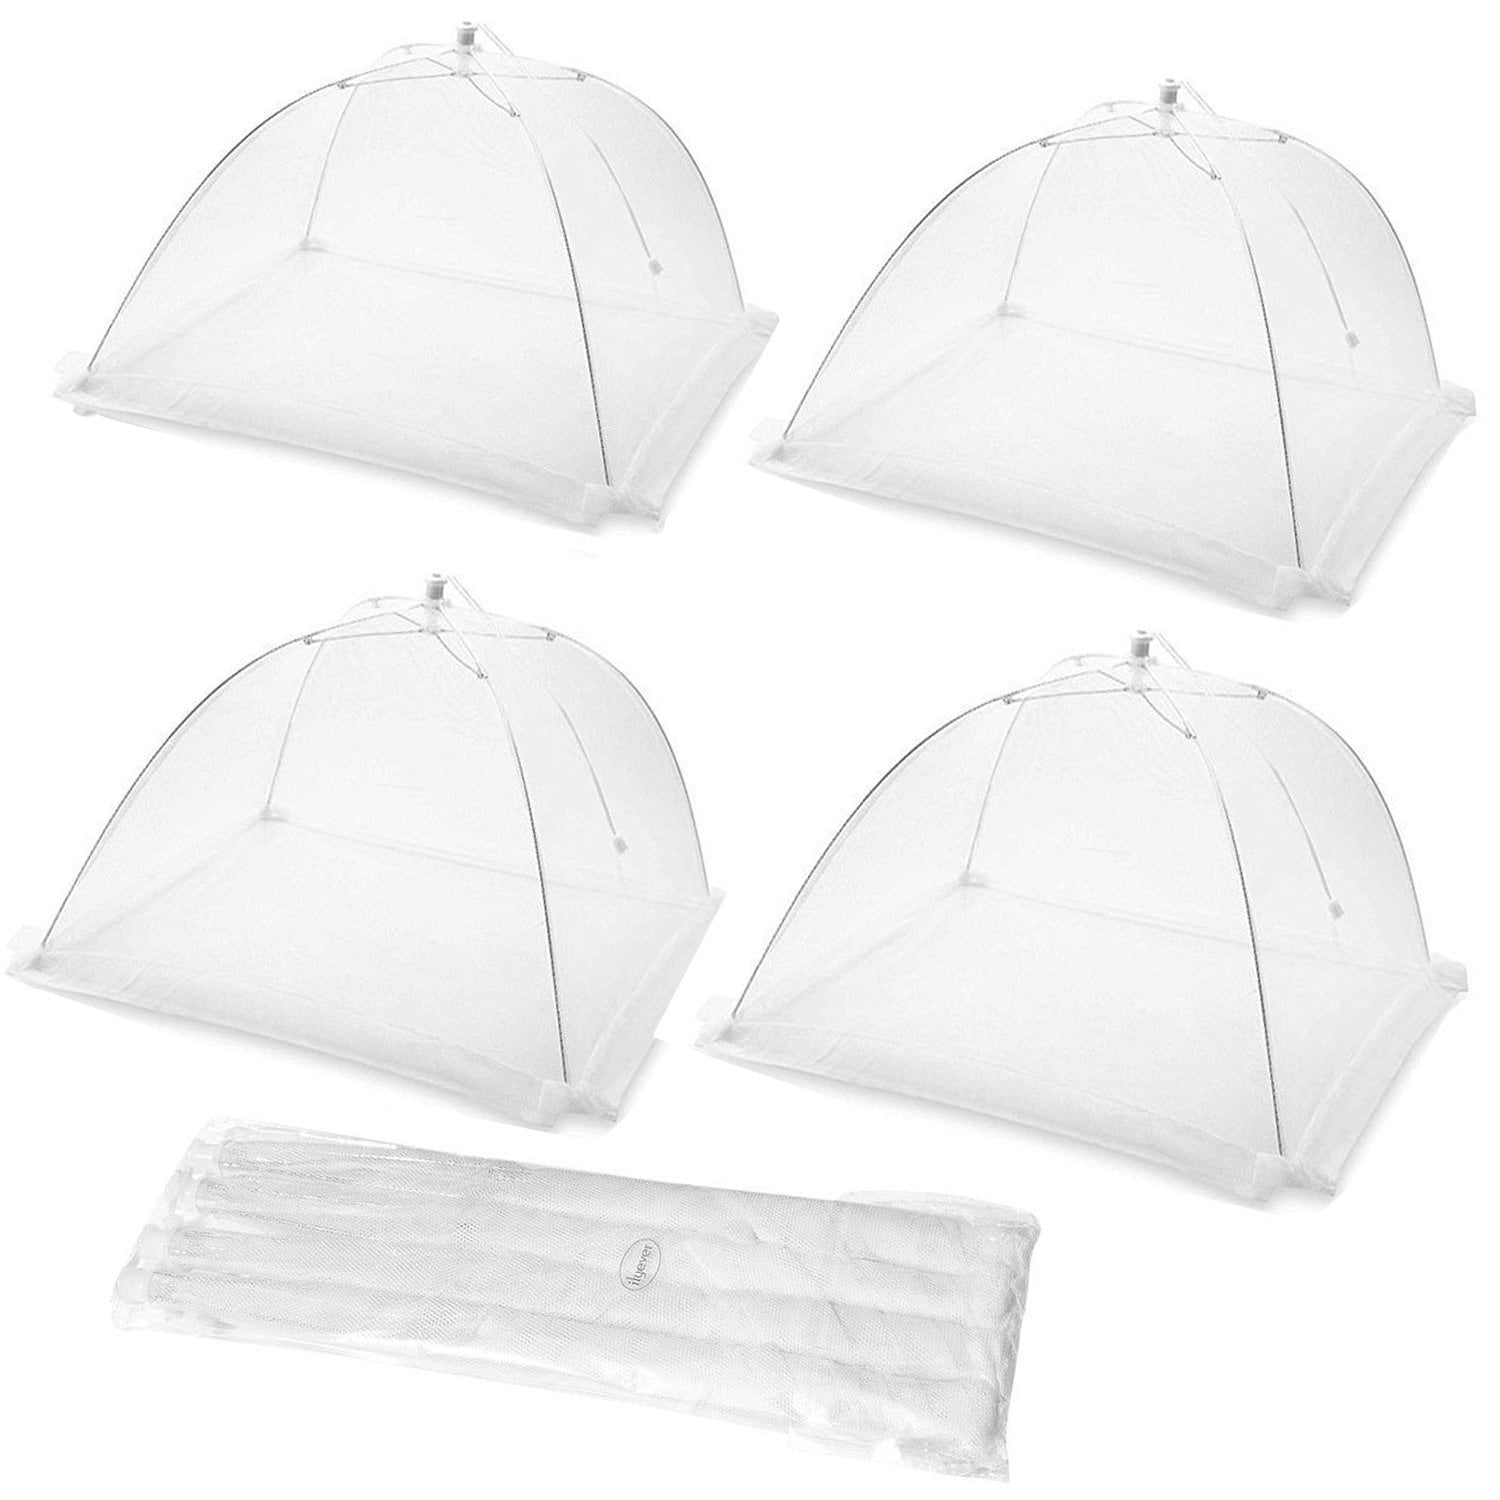 Food Cover Tent, Coolmade (6 Pack) Pop-Up Mesh Cover Reusable and  Collapsible Large Outdoor Mesh Table Cover Umbrella Screen Food Protector  Covers For